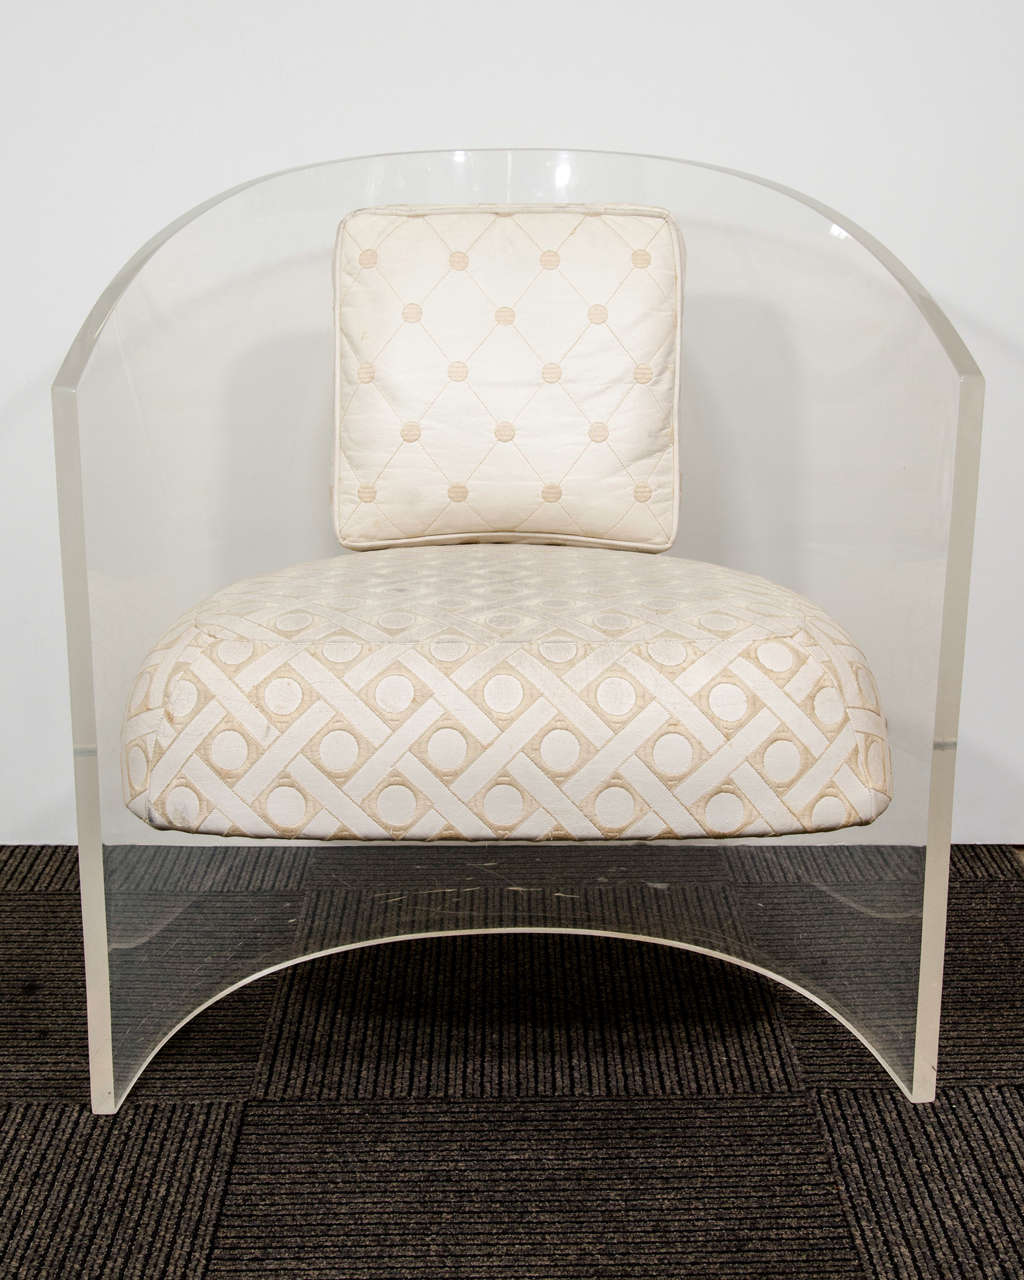 A vintage pair of clear Lucite chairs with white, diamond patterned upholstery.